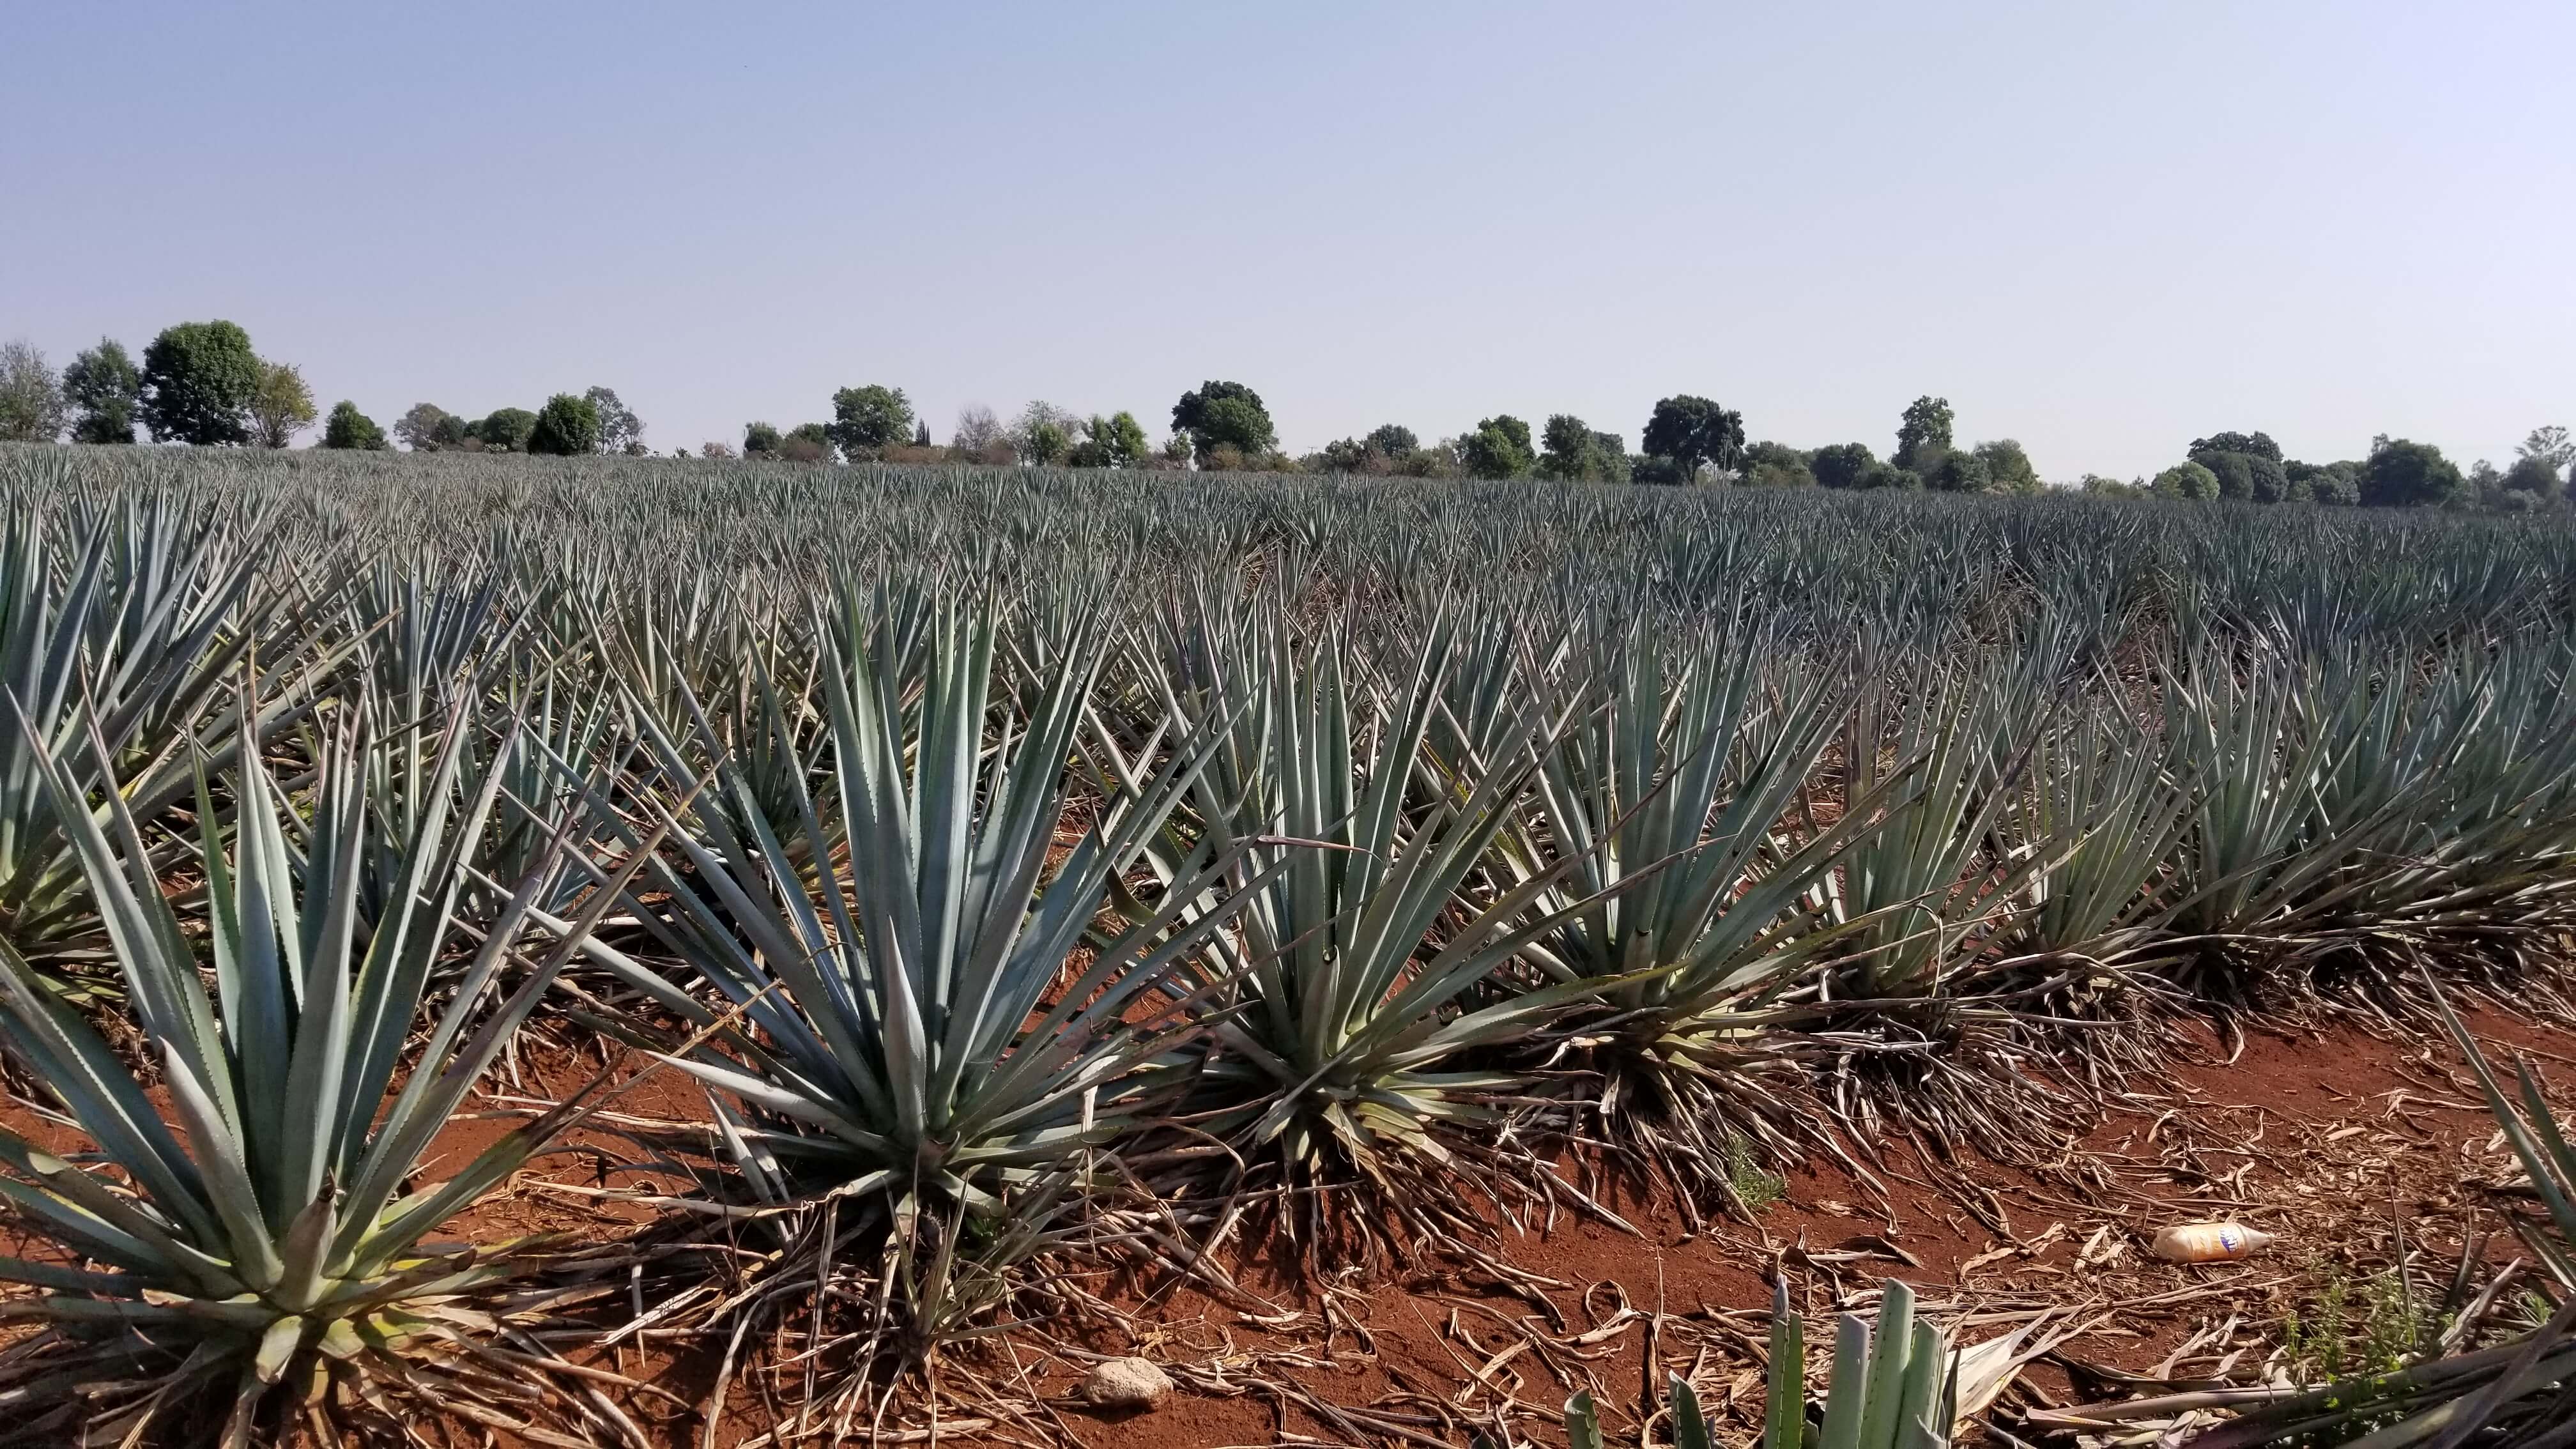 Agave field for Patron Tequila